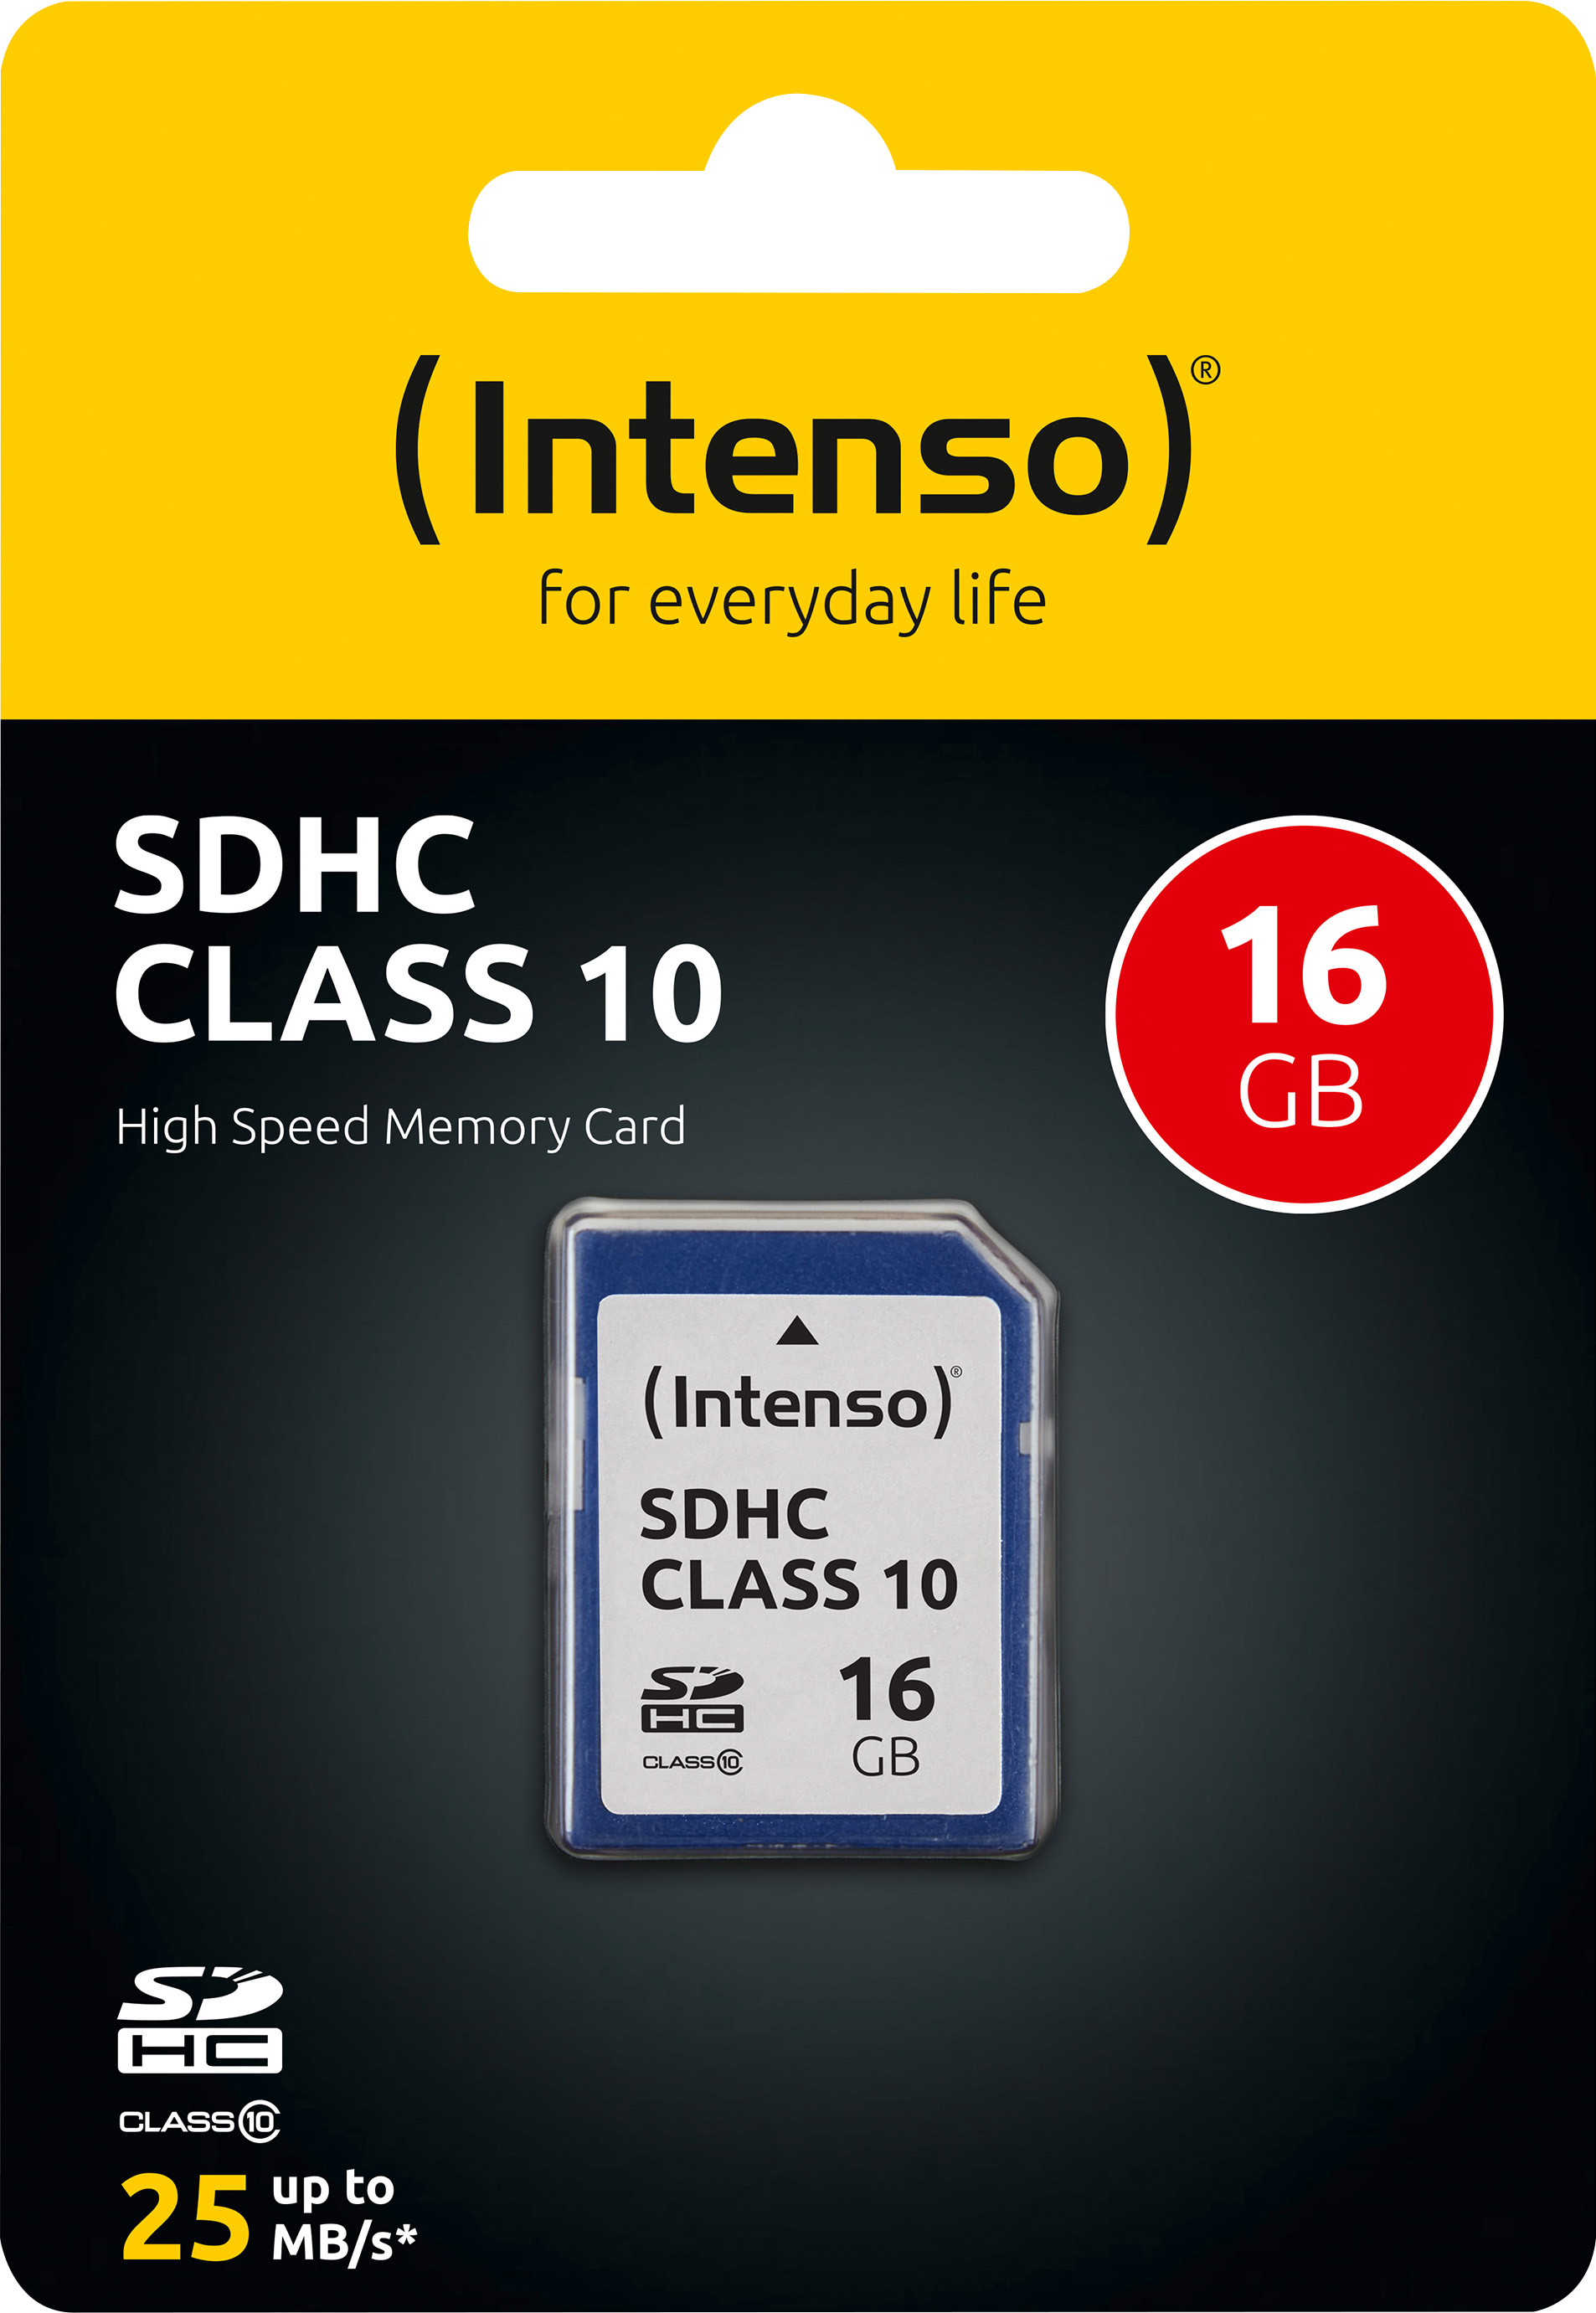 Intenso SDHC-Card 16GB, Class 10 (R) 25MB/s, (W) 10MB/s, Retail-Blister